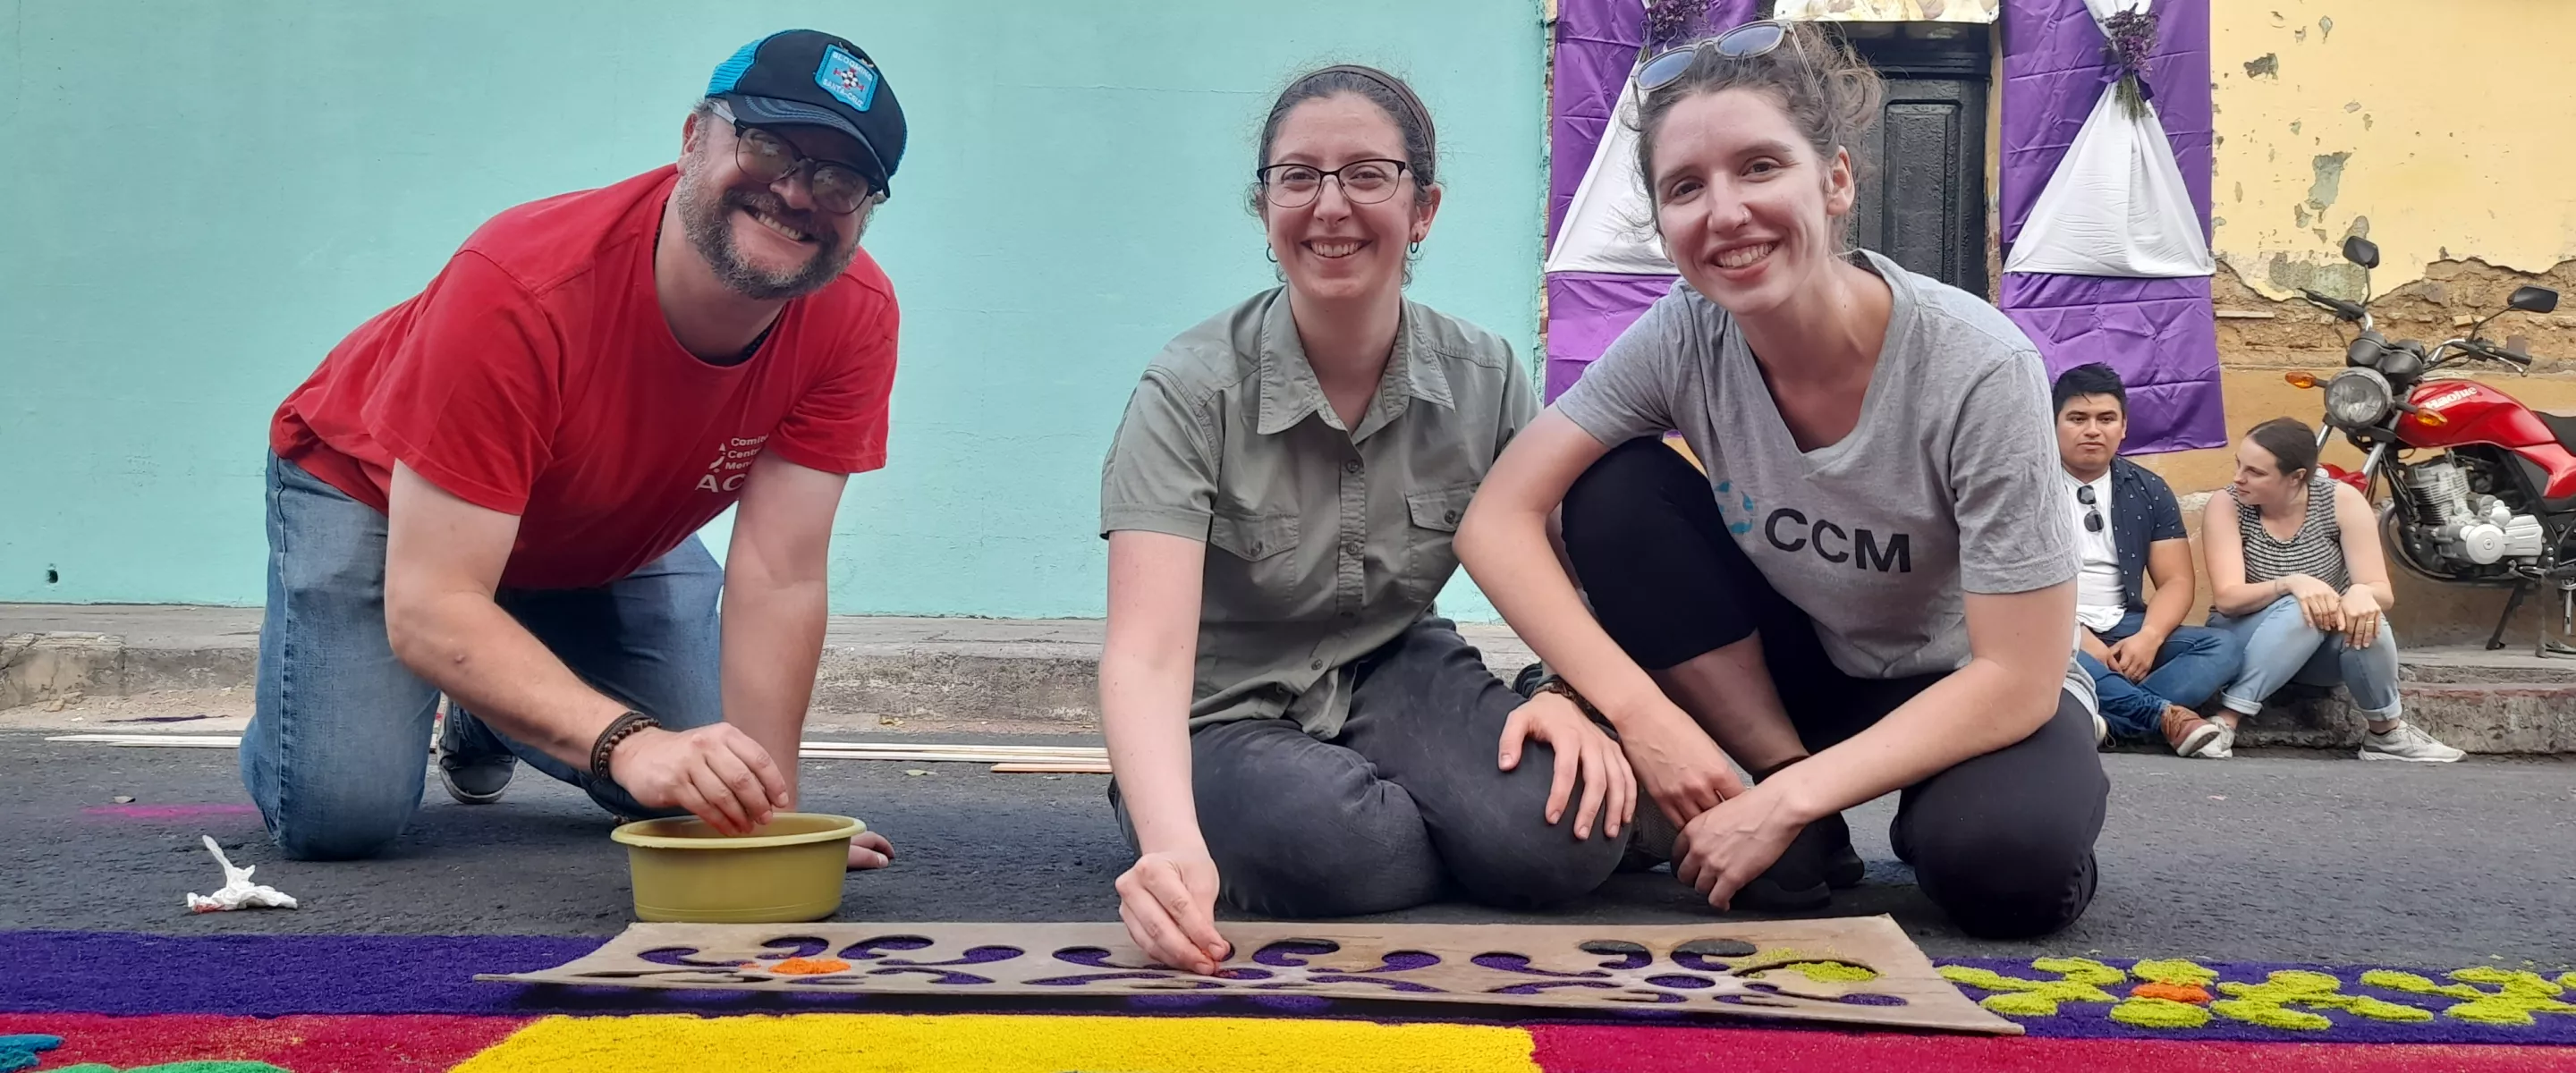 Two women and a man are crouching and smiling at the camera in front of a colourful canvas.